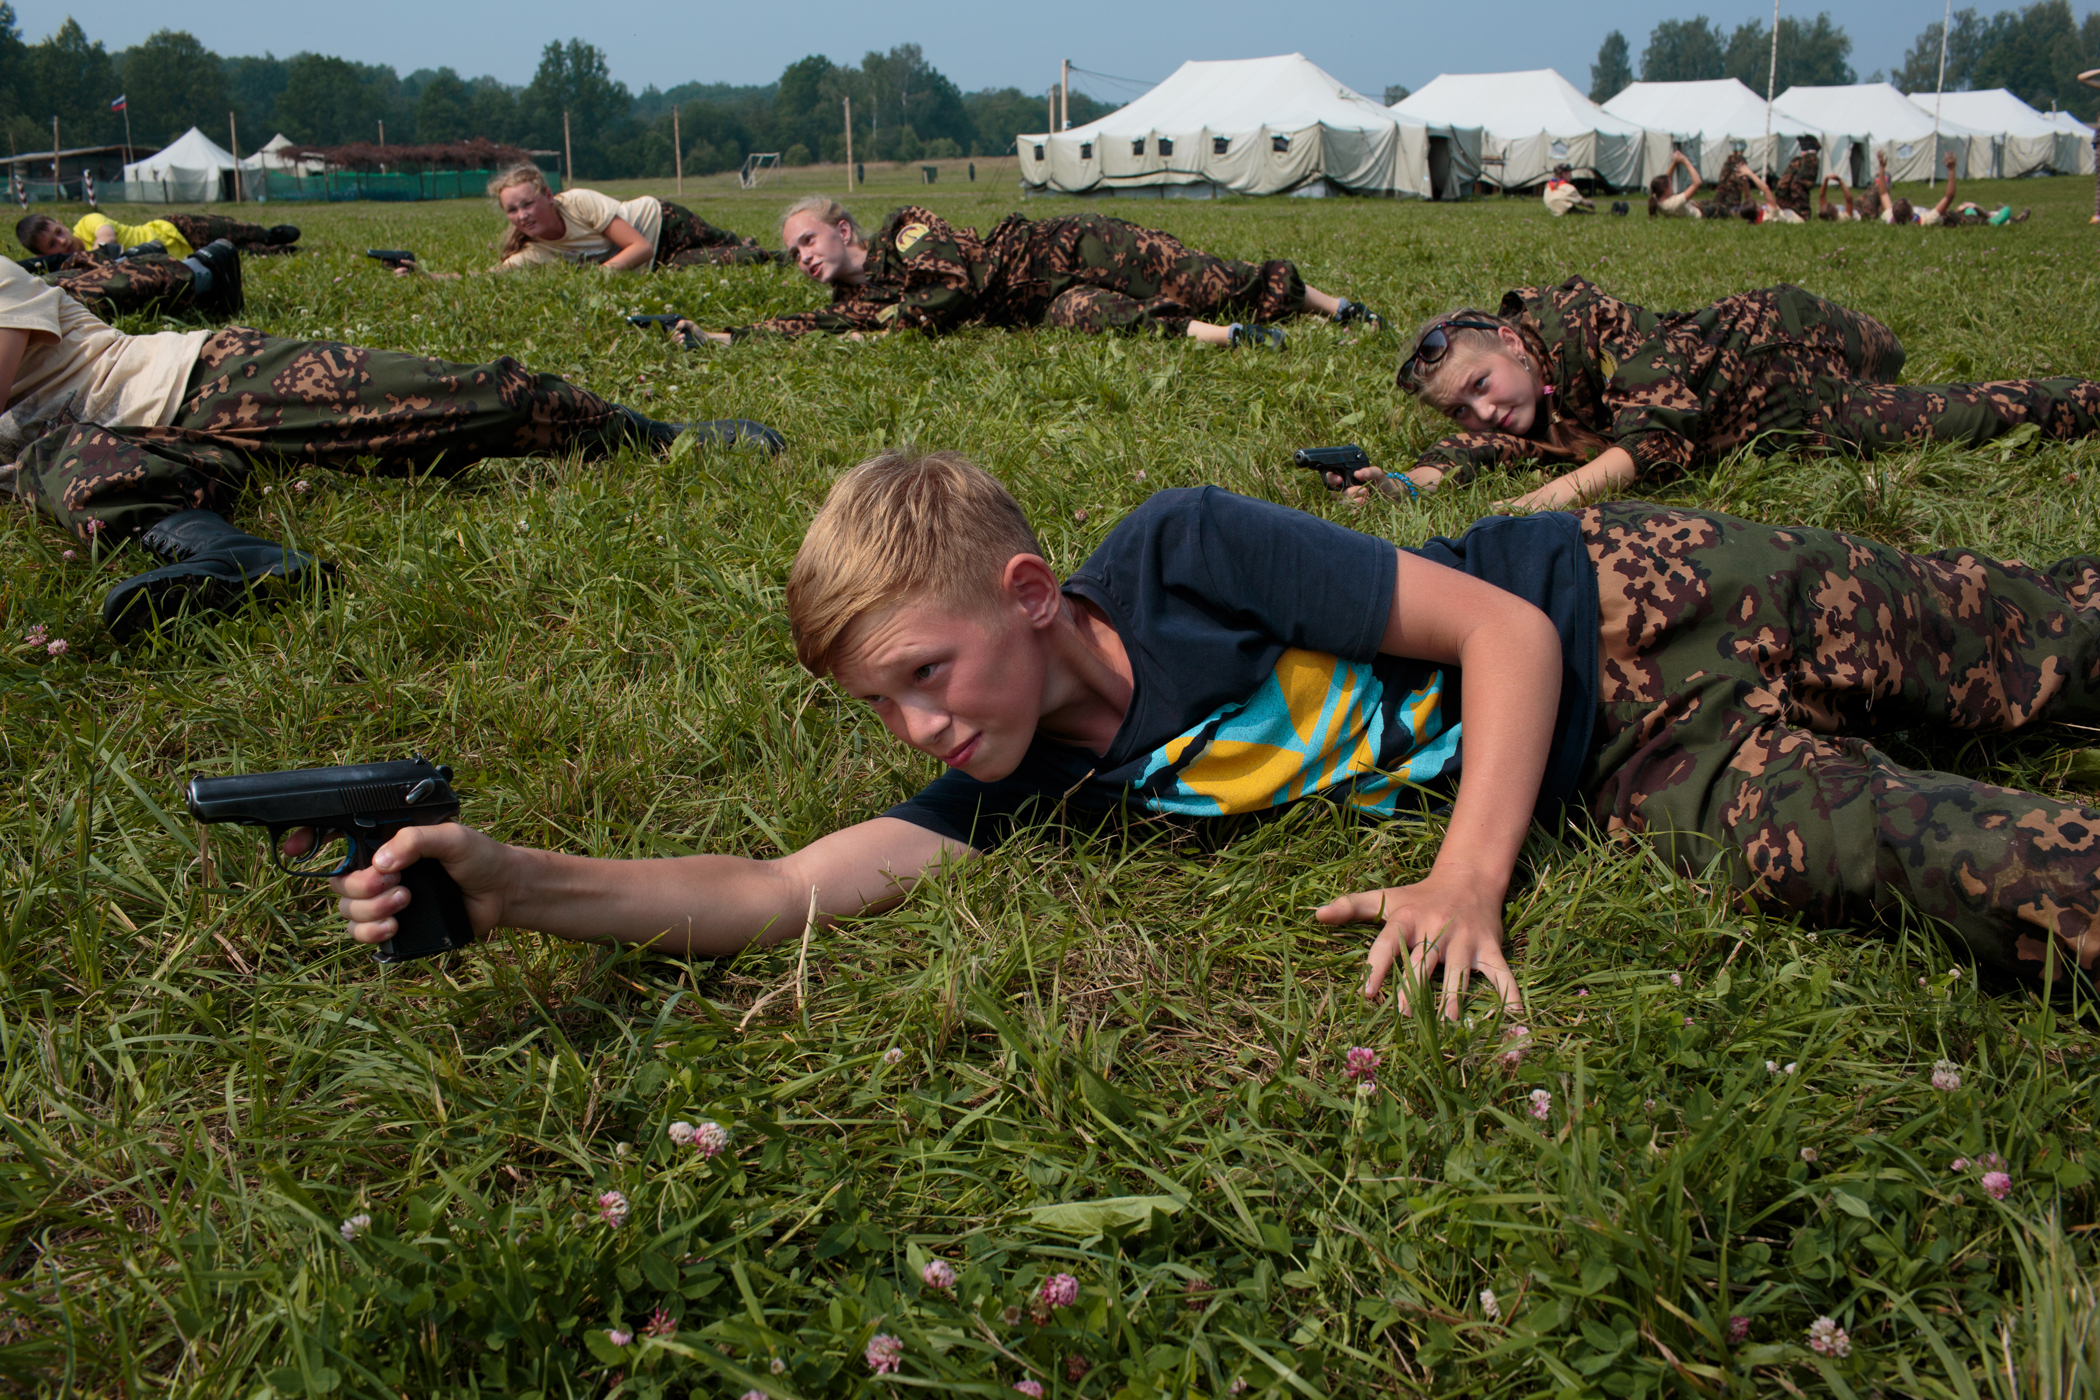 Students practice shooting air soft guns at a Historical-War Camp in Borodino, Russia. Borodino is where the deadliest day of the Napoleonic War was fought in 1812. 350 kids attend the camp, ranging in age from 11 to 17. It teaches campers about weapons, bases, and warfare. The project statement of the camp says: "To awaken in the younger generation a keen interest in the history of the Fatherland, the glorious deeds of our ancestors, to facilitate the expansion of military-historical knowledge."